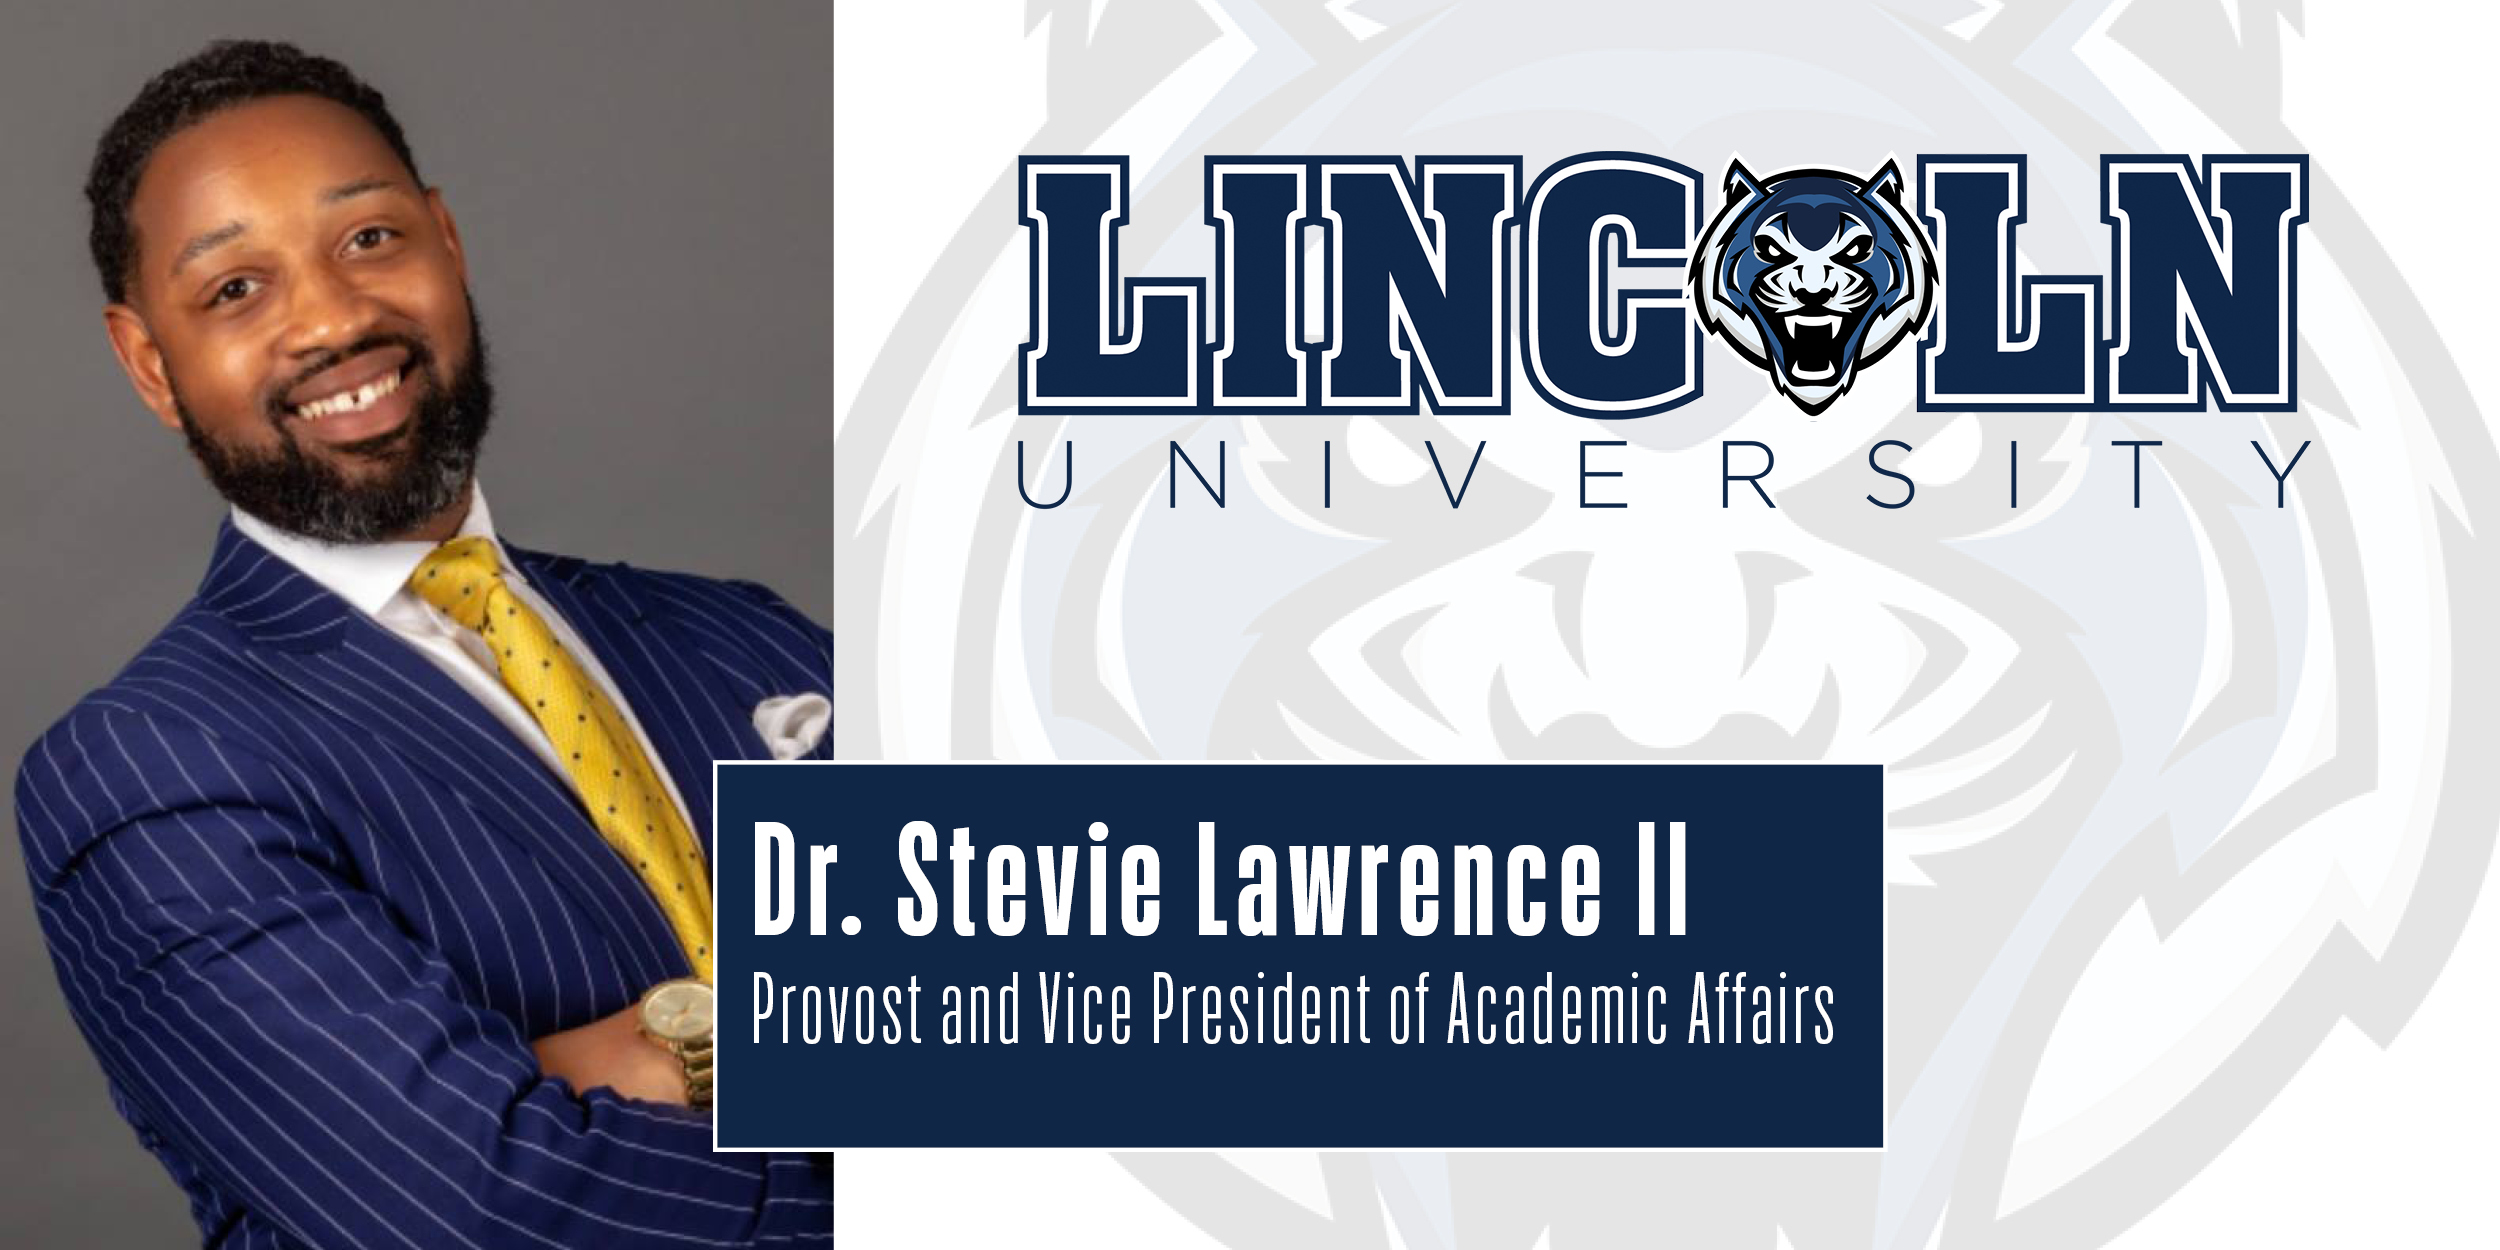 LU welcomes Dr. Stevie Lawrence II as new Provost and Vice President of Academic Affairs starting July 1, 2023.